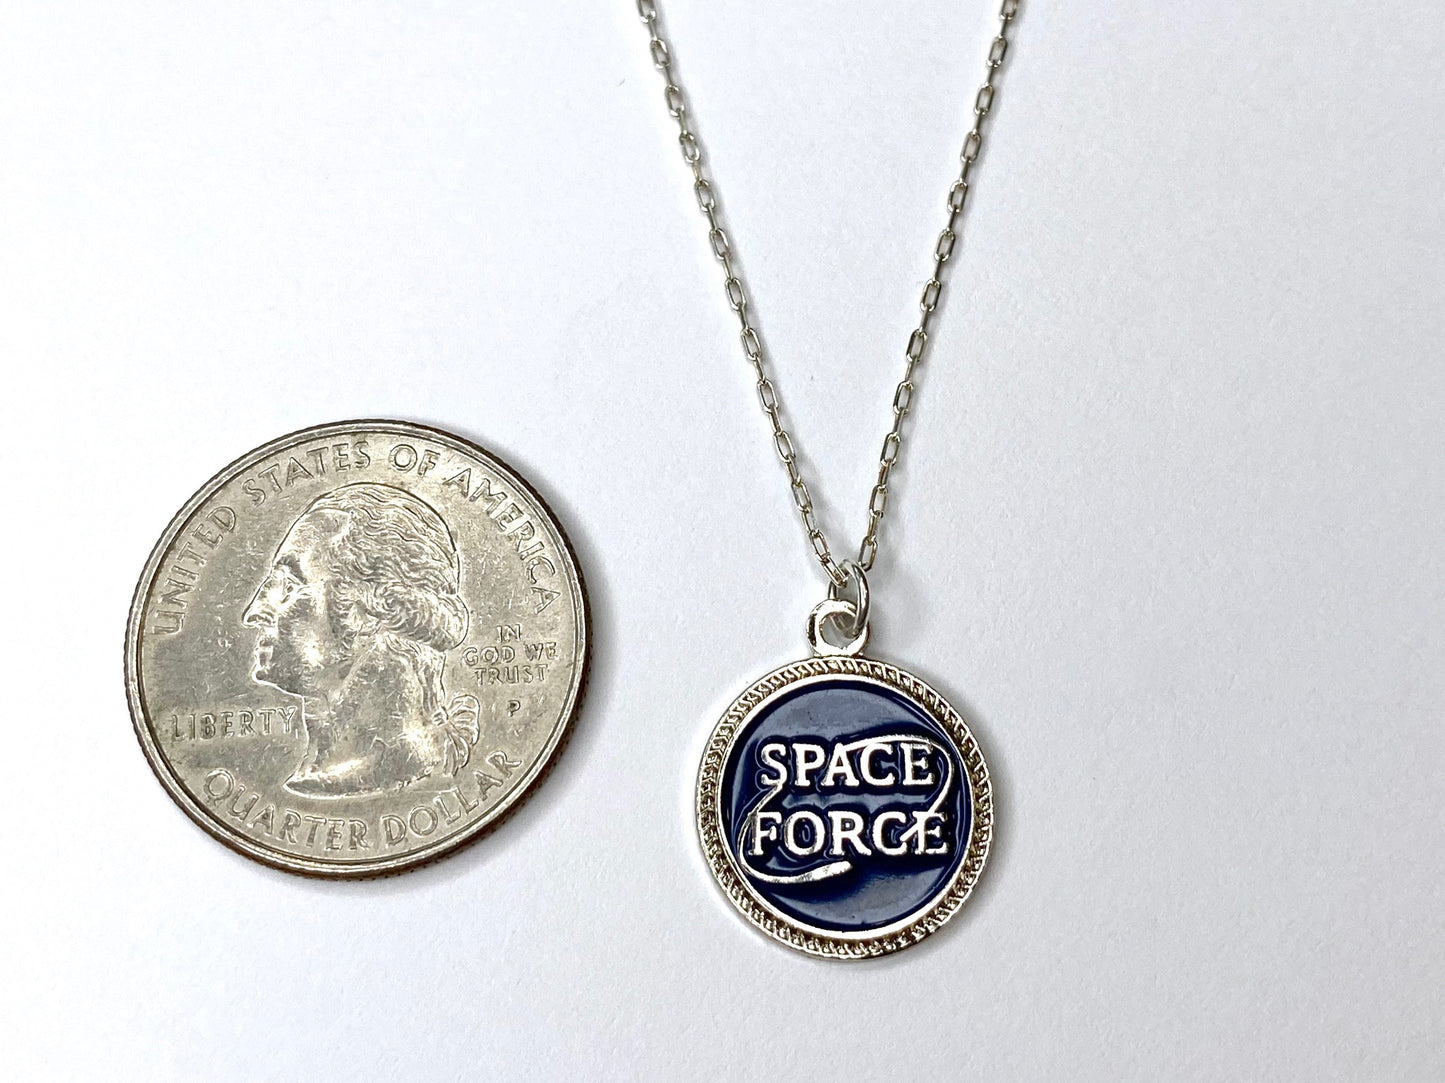 Space Force Charm Necklace